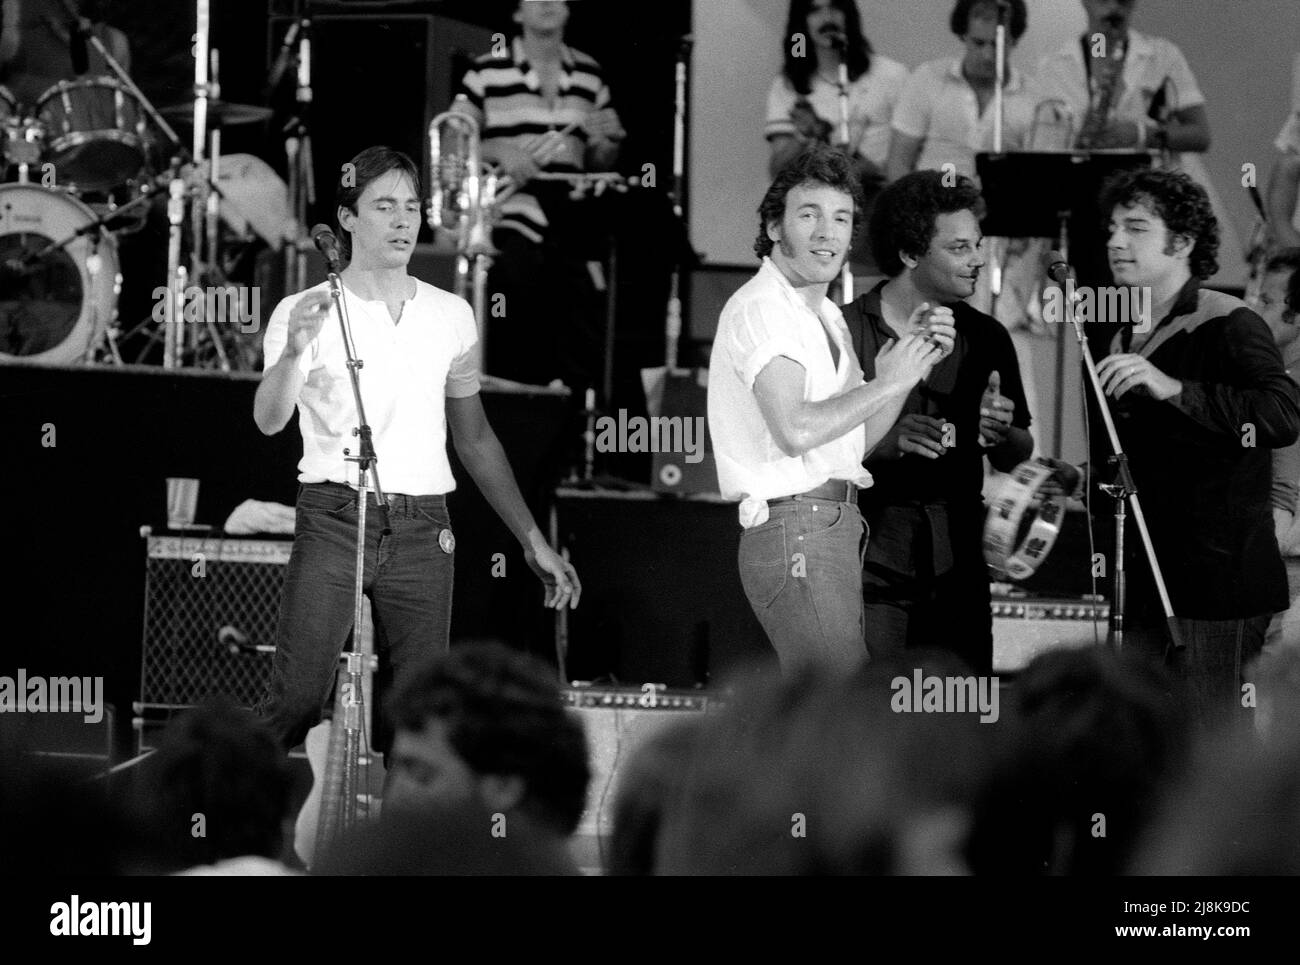 Jackson Browne singing, backed by Bruce Springsteen and Gary U.S. Bonds, No Nukes, concert, Hollywood Bowl, 1981 Stock Photo